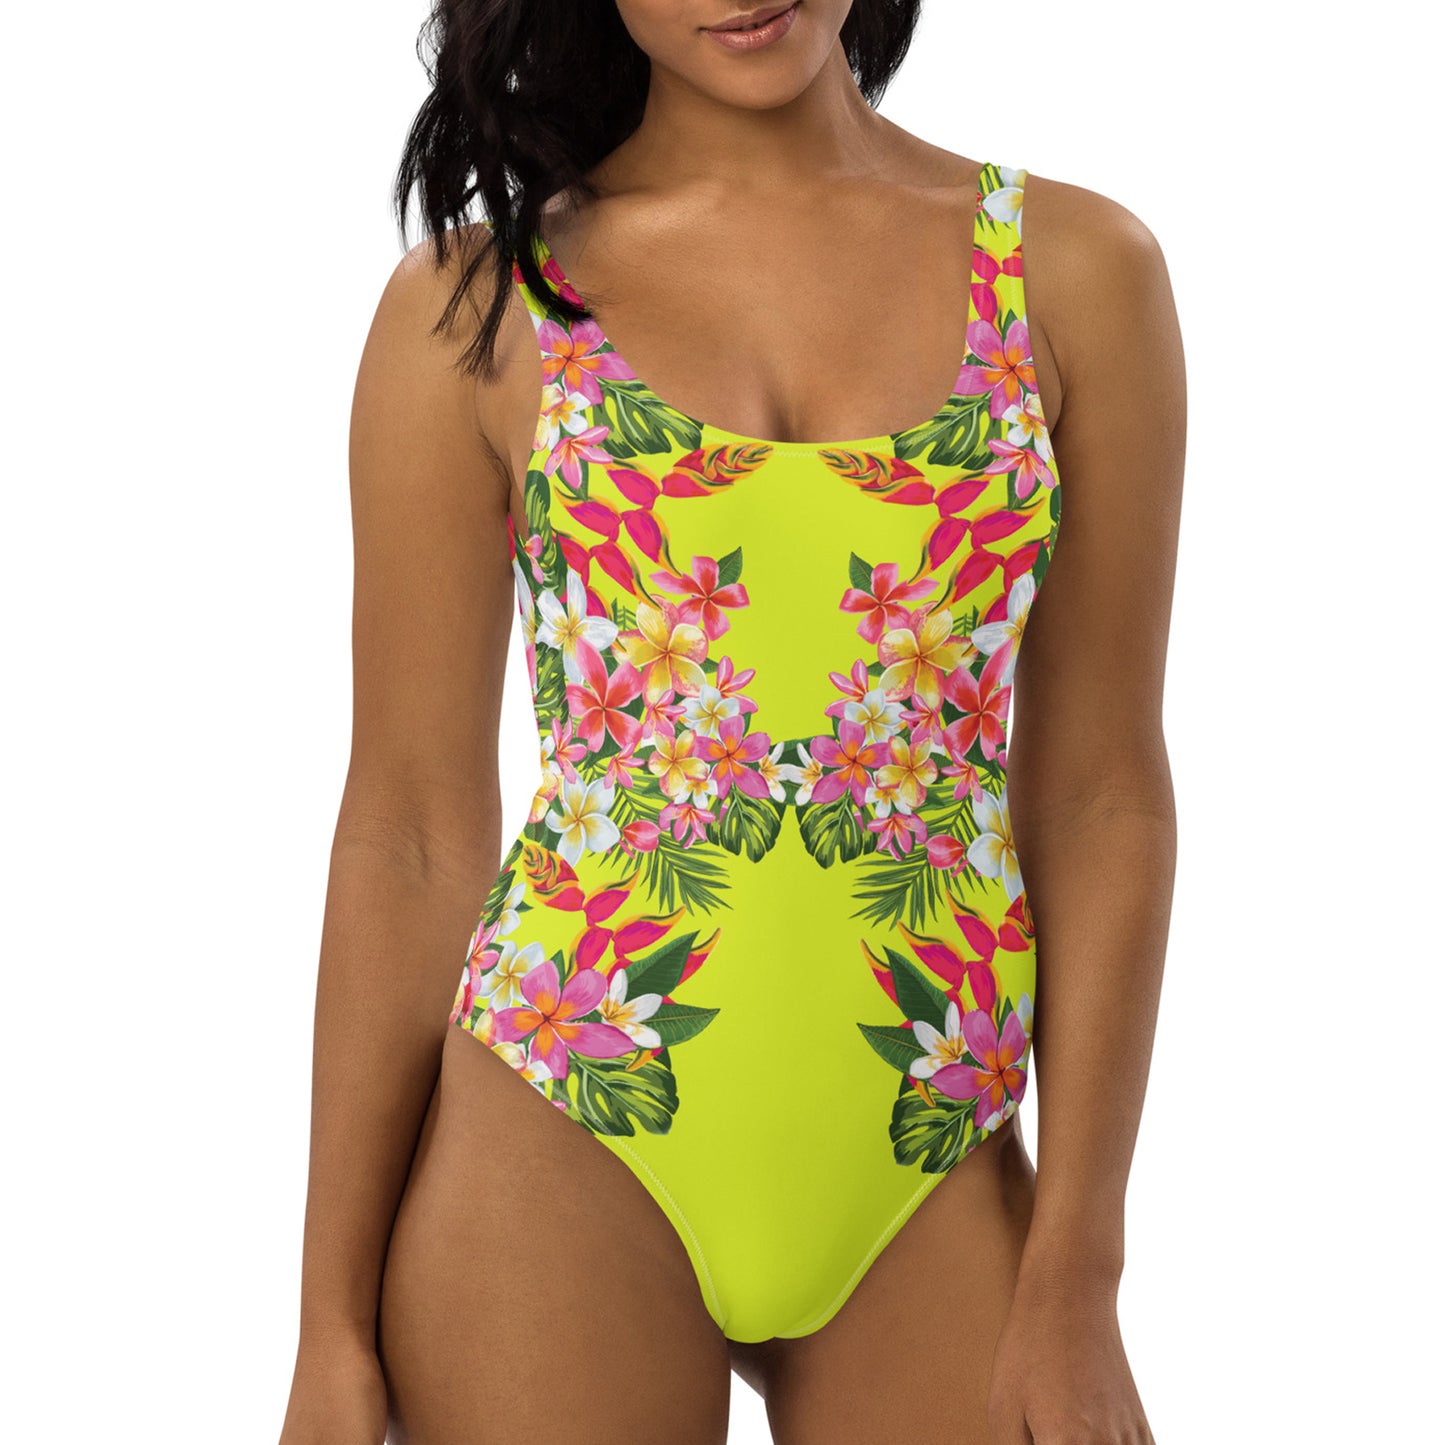 Luxury Body Contour Low Back Tropical Yellow One-piece Swimsuit